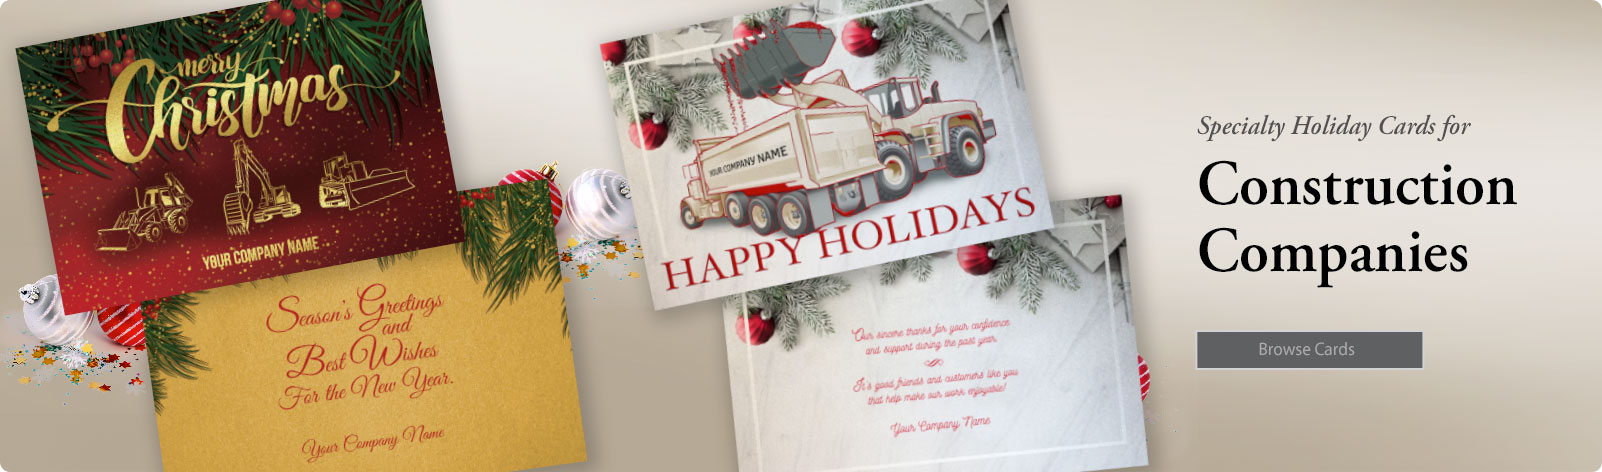 Pearl Papaer Flat Construction-Excavating-Paving Christmas Holiday Cards!